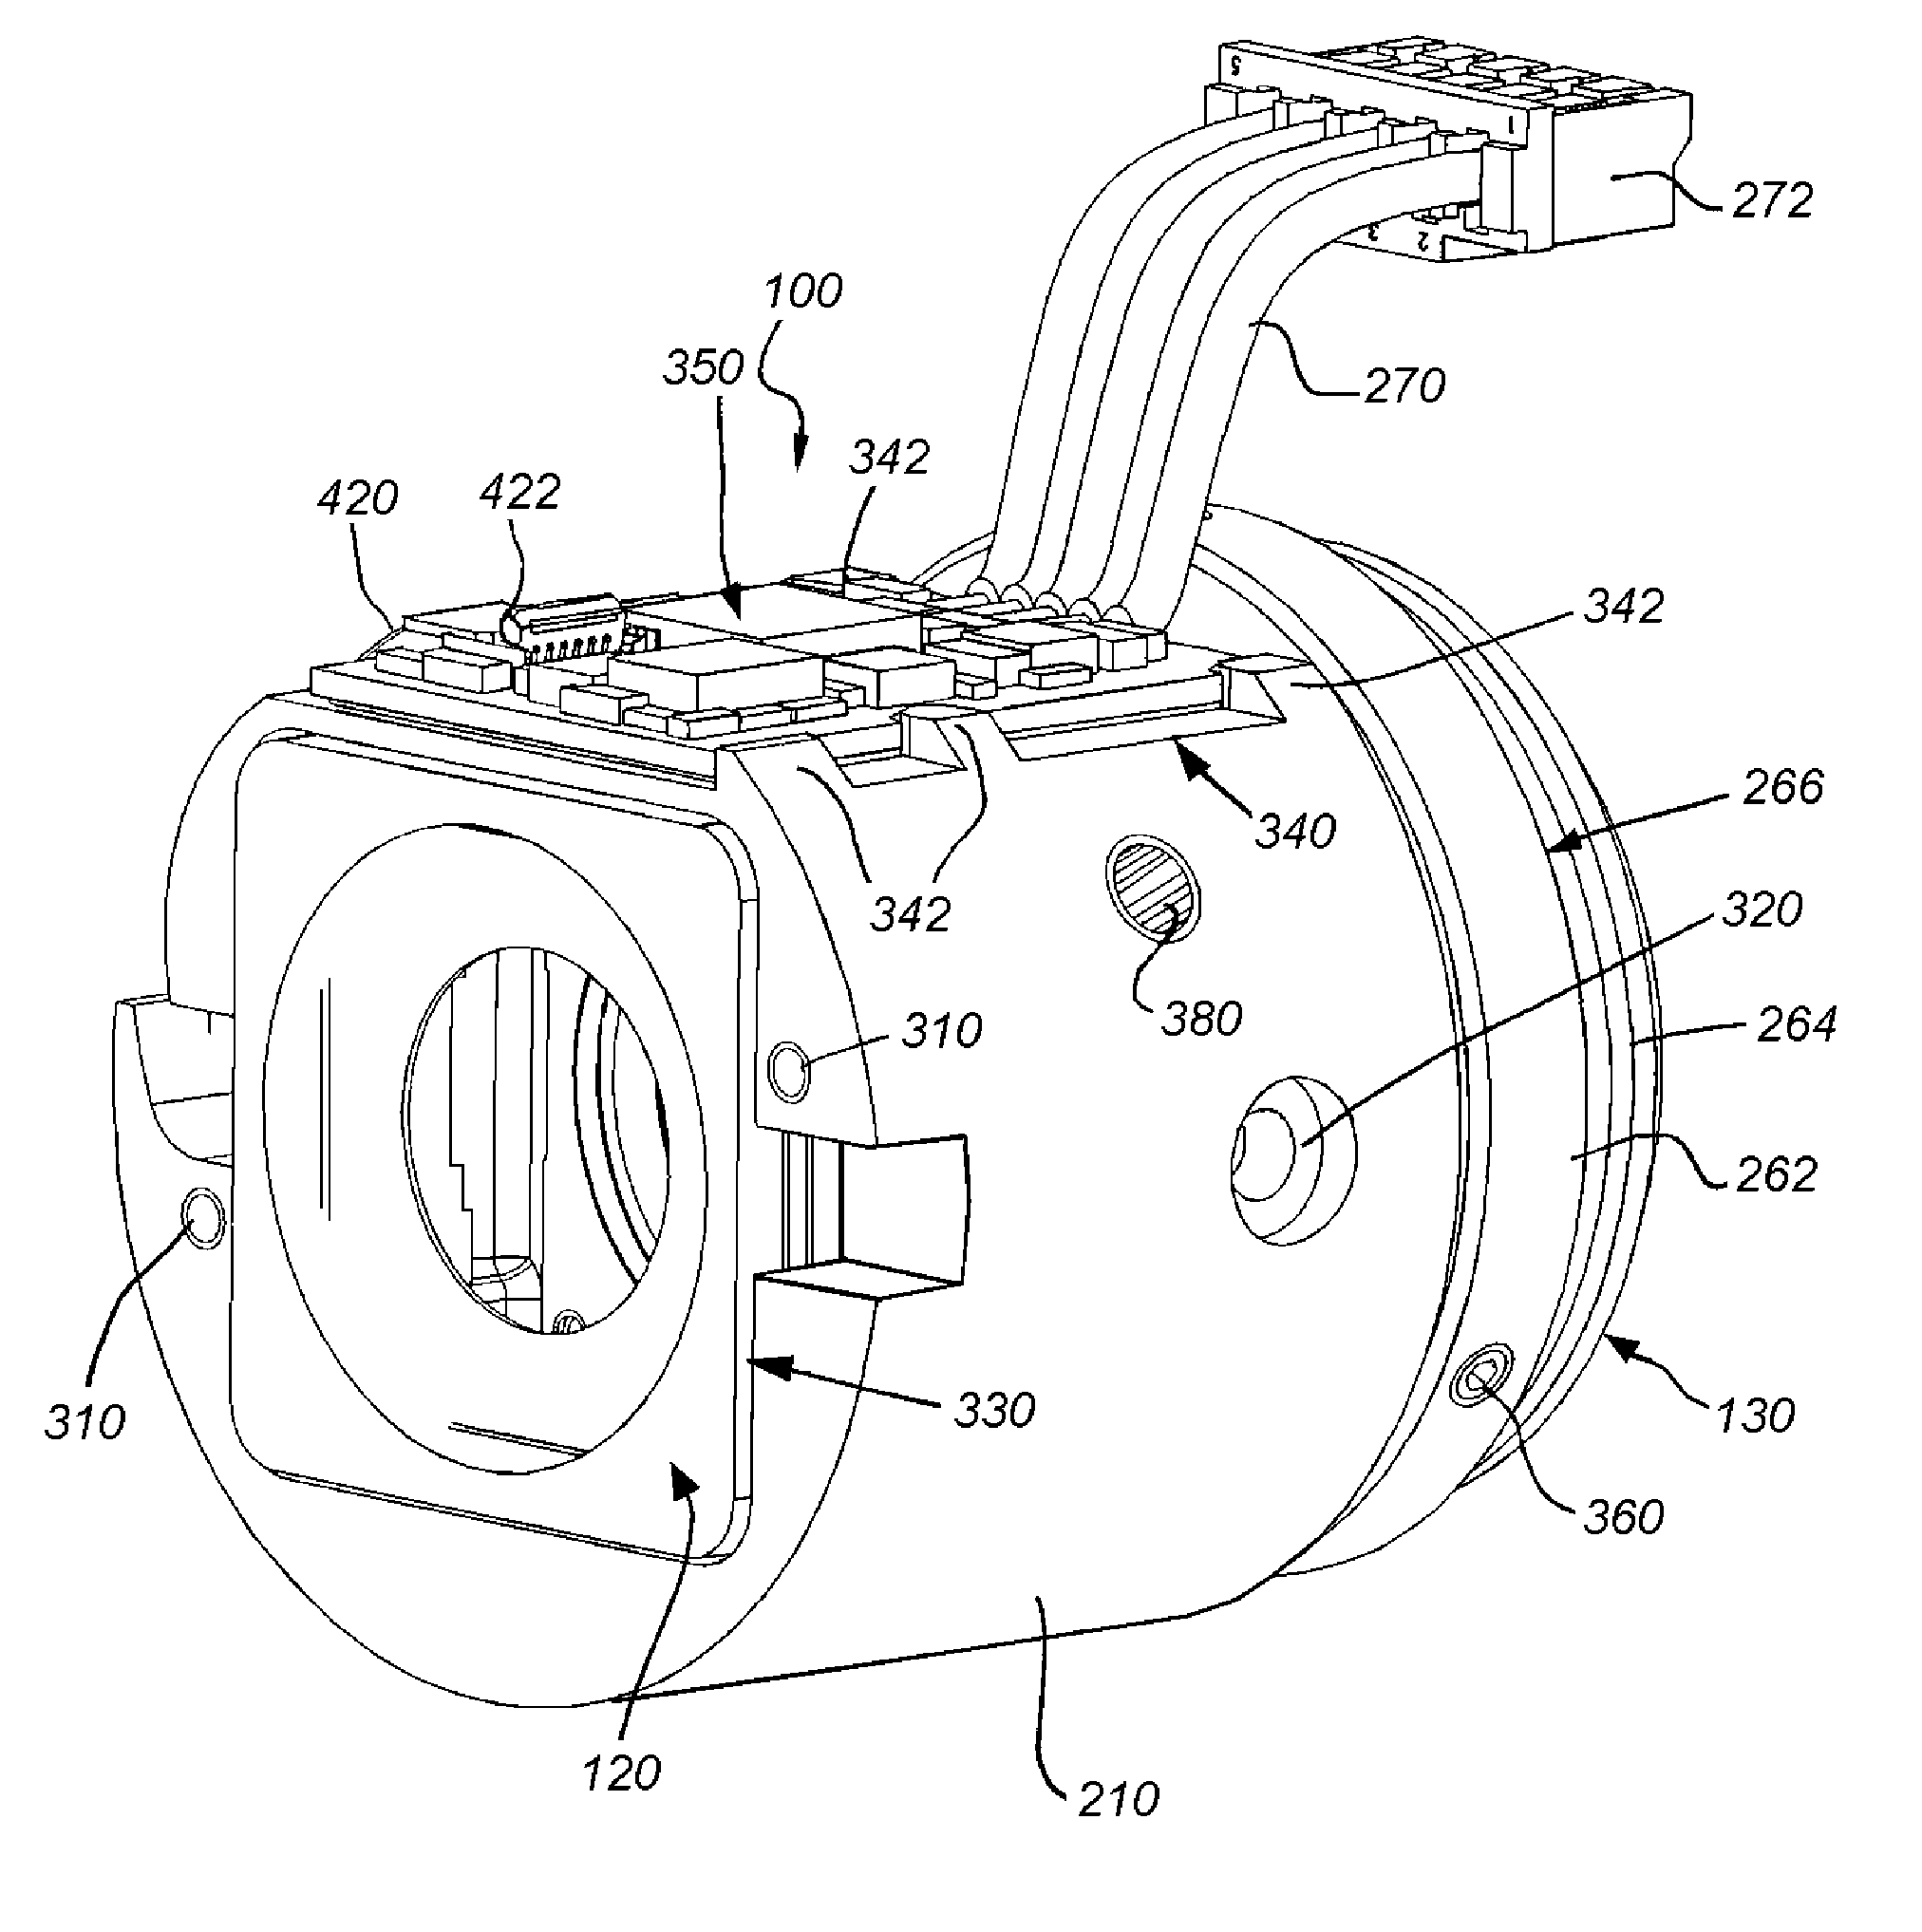 Lens assembly with integrated feedback loop for focus adjustment